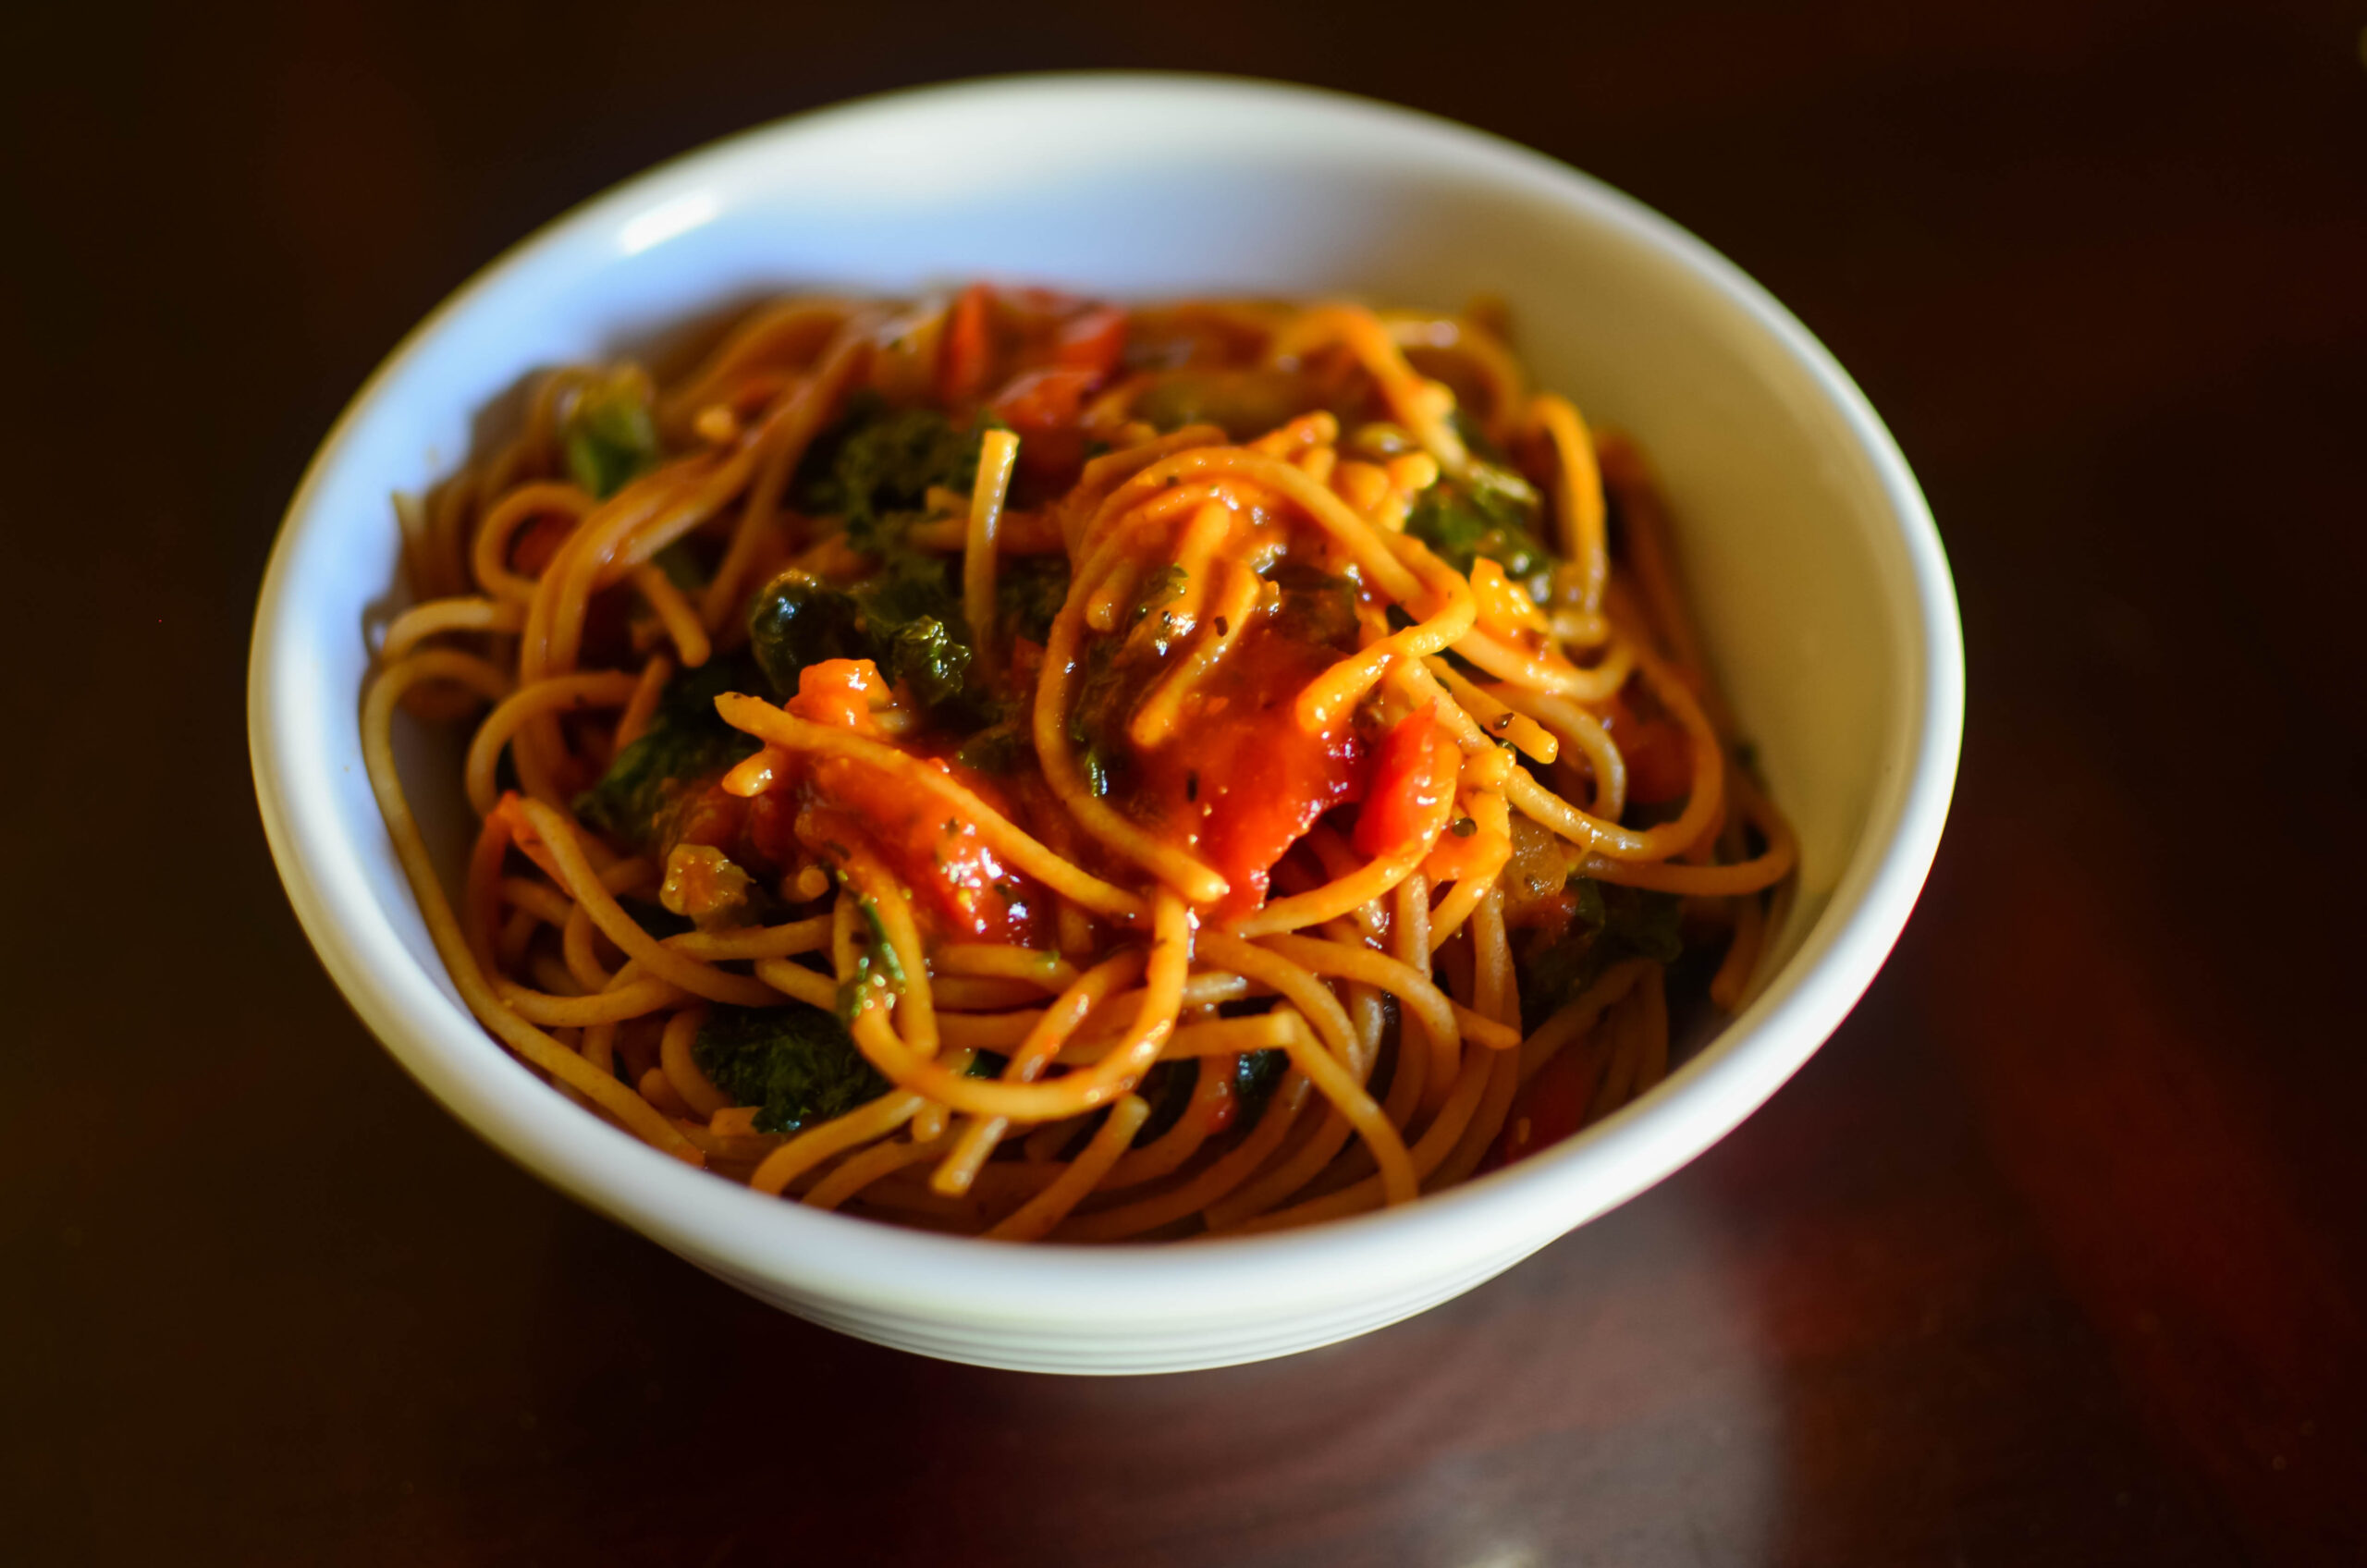 One Pot Pasta: Kale, Broccoli and Roasted Peppers Spaghetti